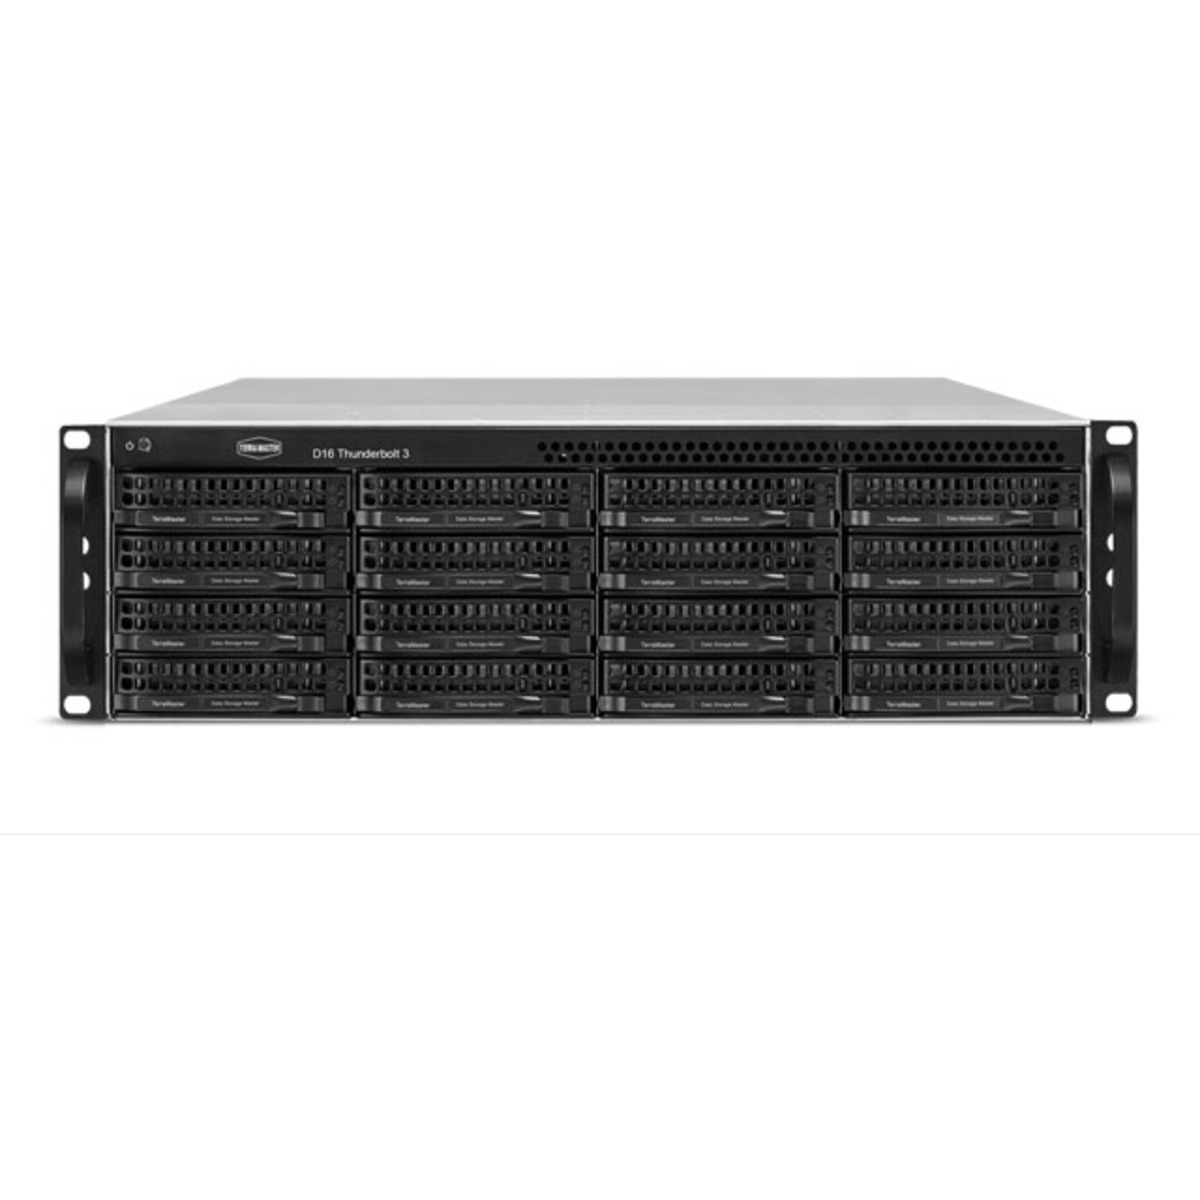 TerraMaster D16 Thunderbolt 3 112tb 16-Bay RackMount Multimedia / Power User / Business DAS - Direct Attached Storage Device 14x8tb Western Digital Red Plus WD80EFPX 3.5 7200rpm SATA 6Gb/s HDD NAS Class Drives Installed - Burn-In Tested D16 Thunderbolt 3